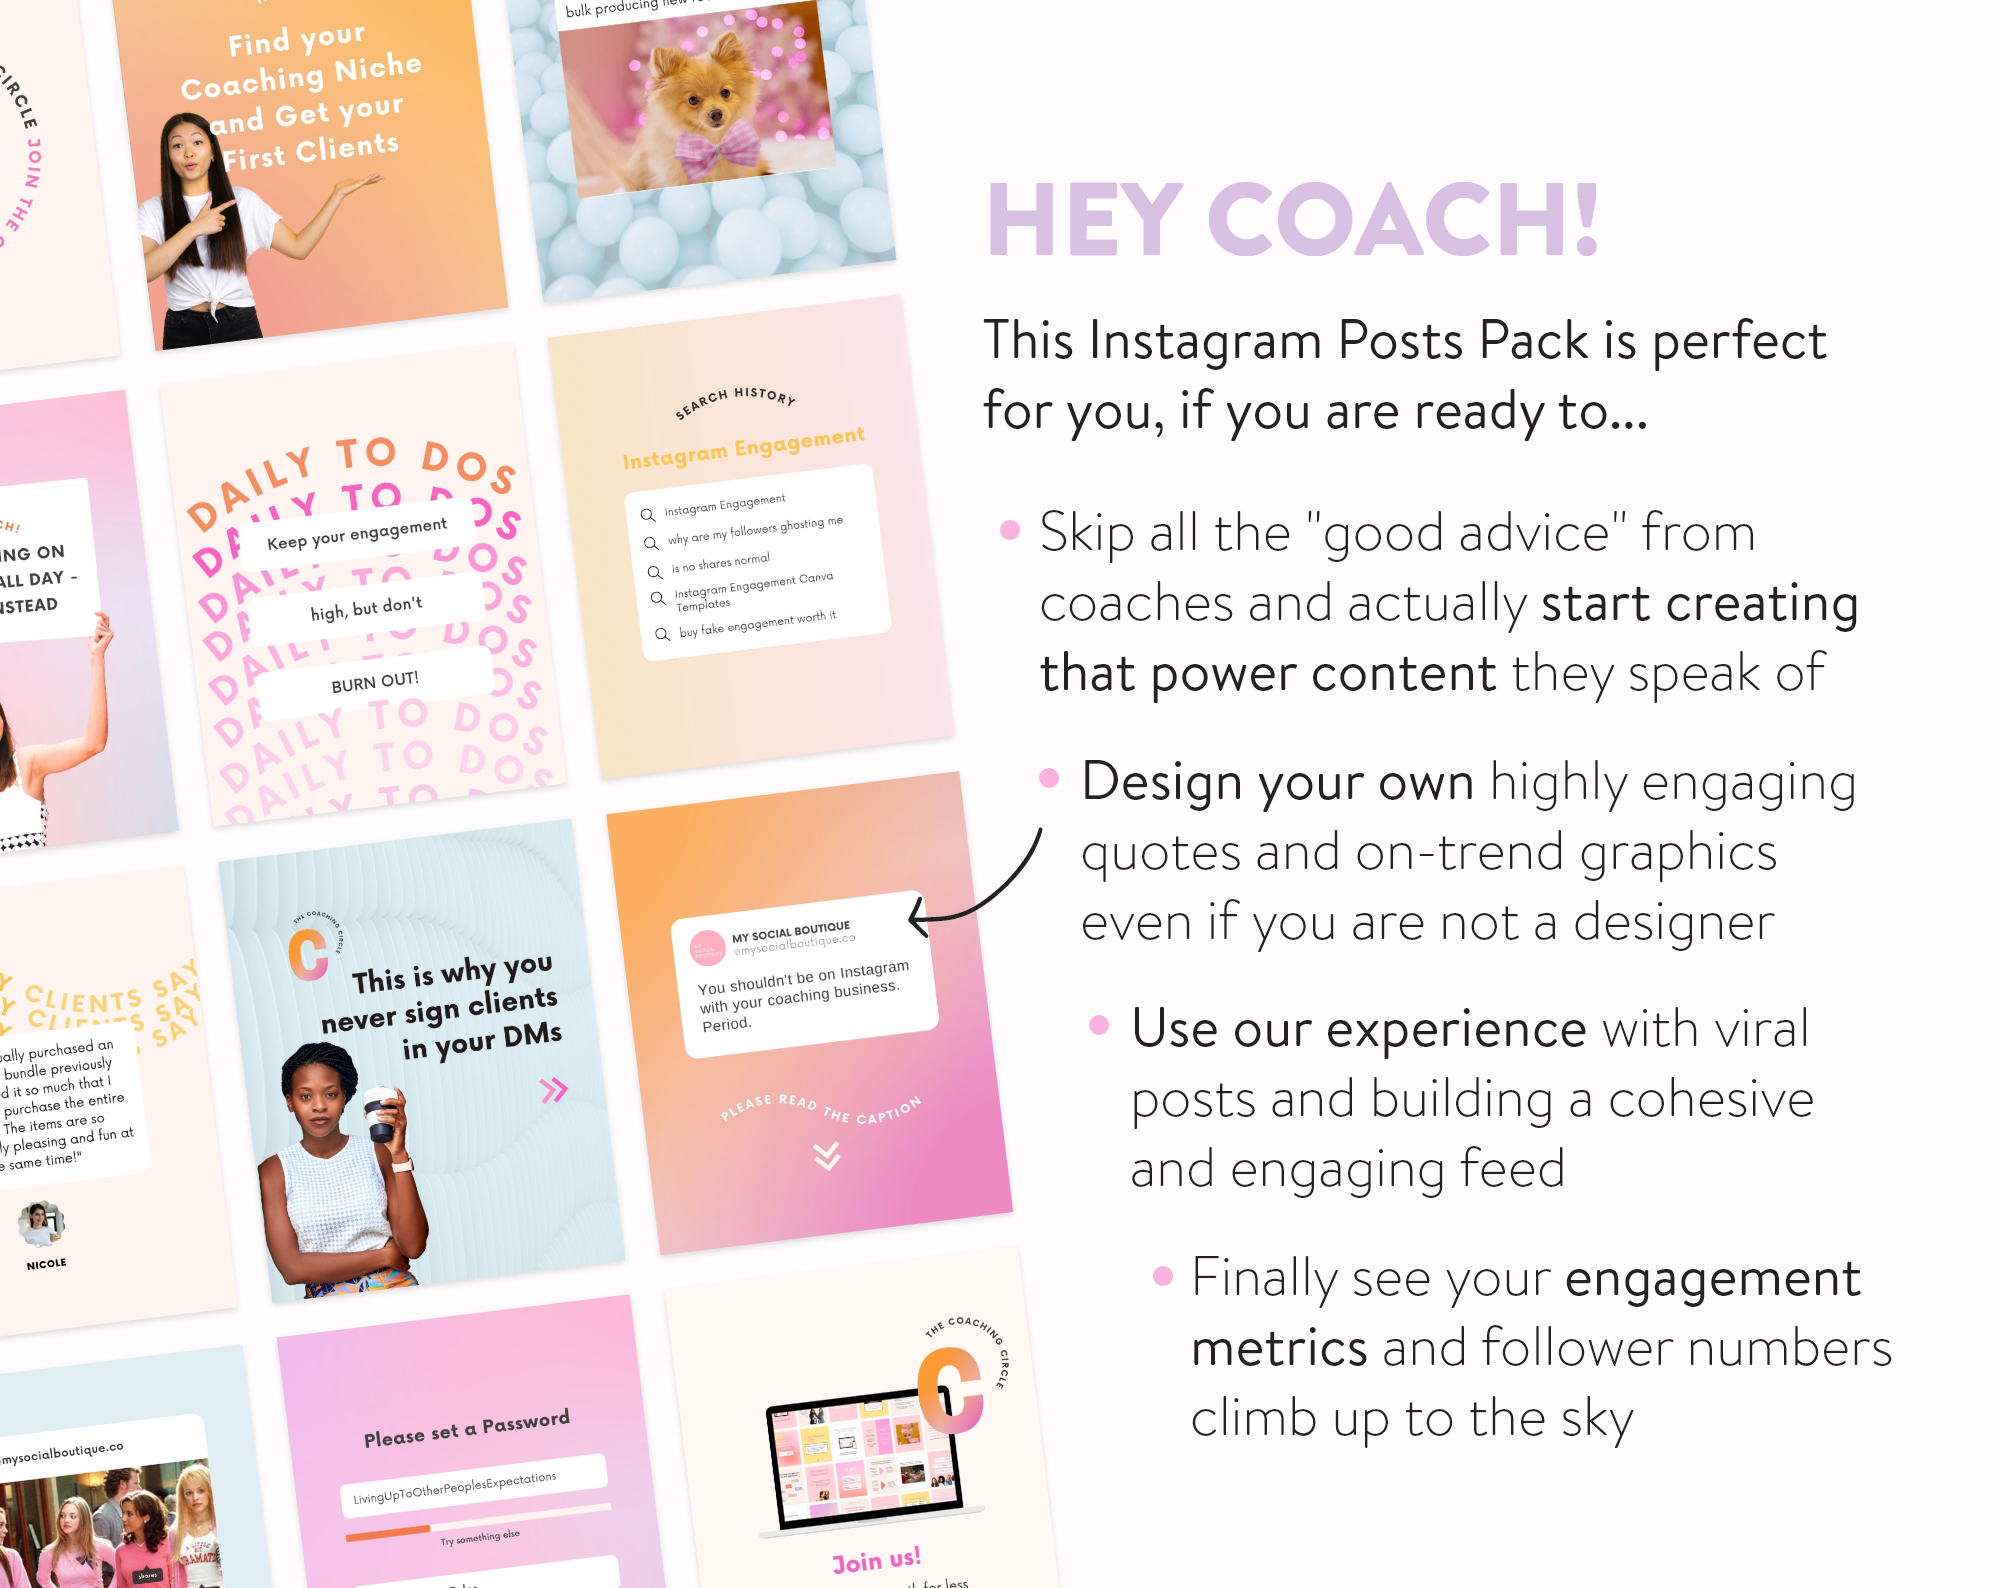 Coach-Engagement-post-pack-Instagram-who-is-it-for-8